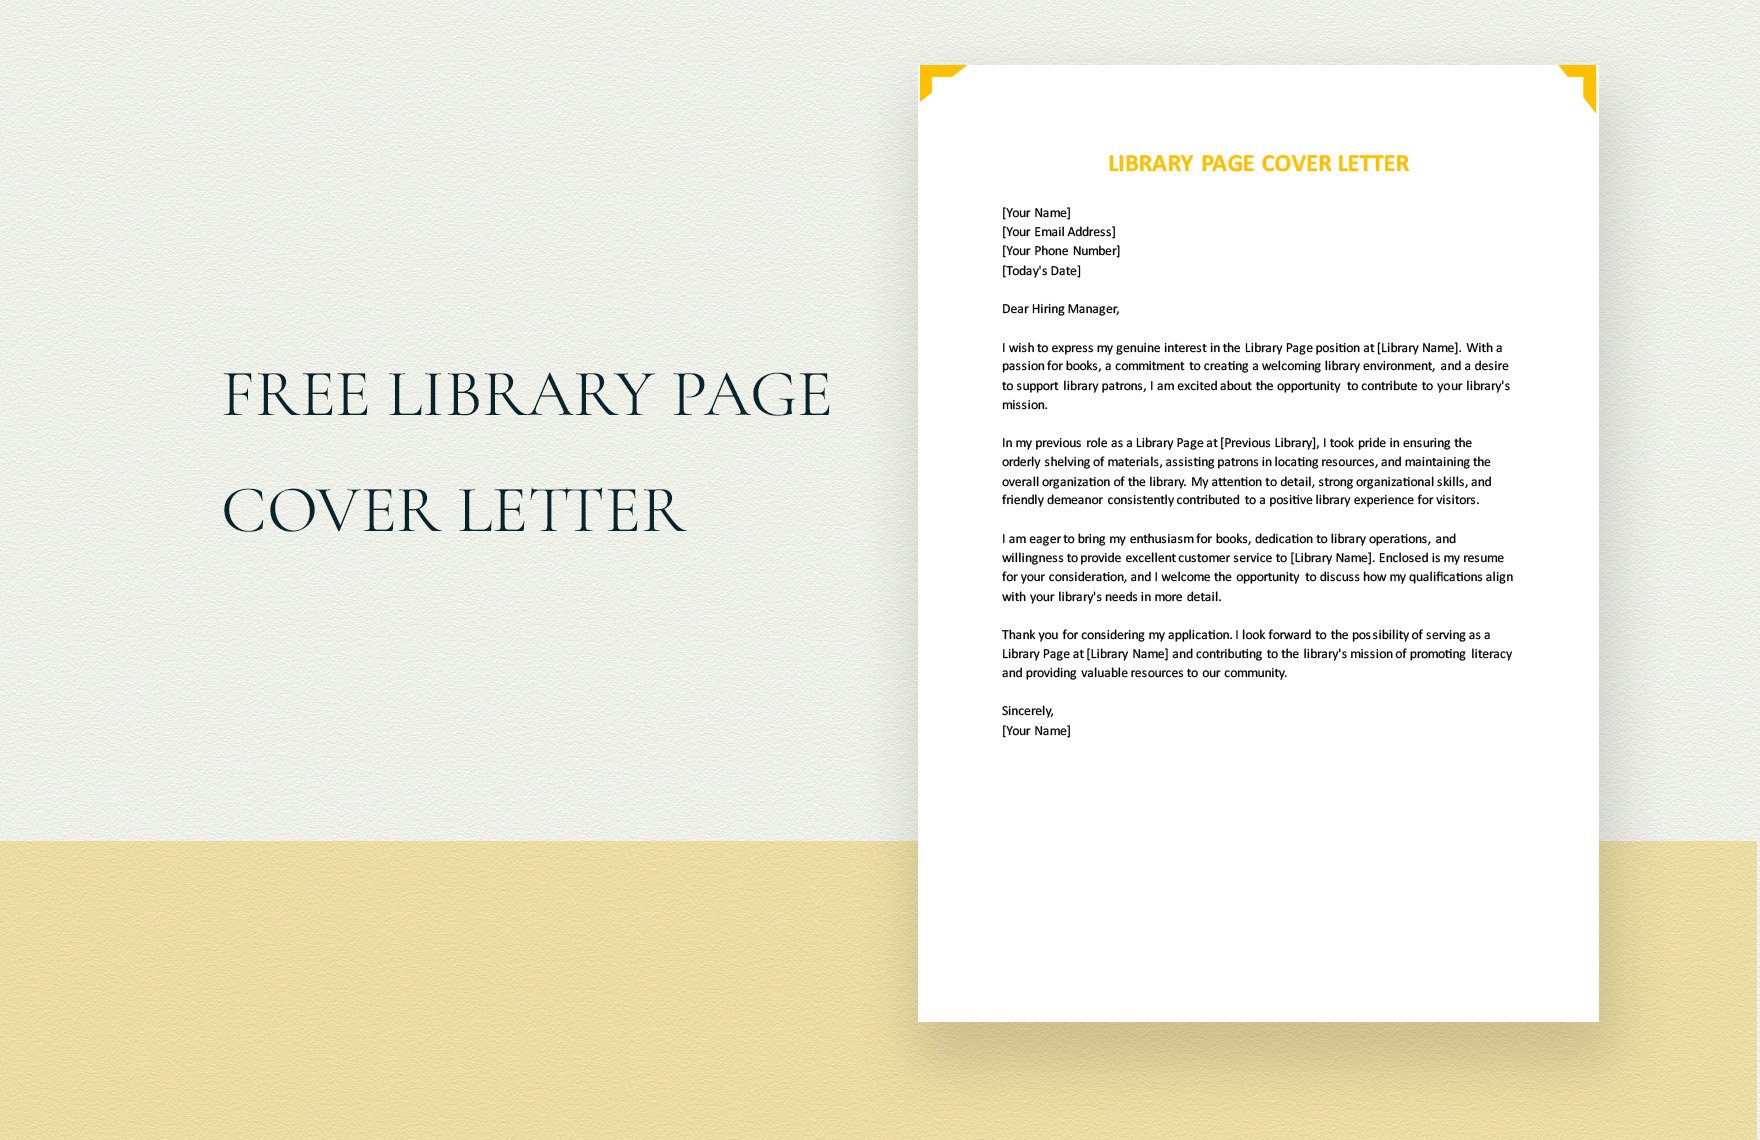 Free Library Page Cover Letter in Word, Google Docs, PDF